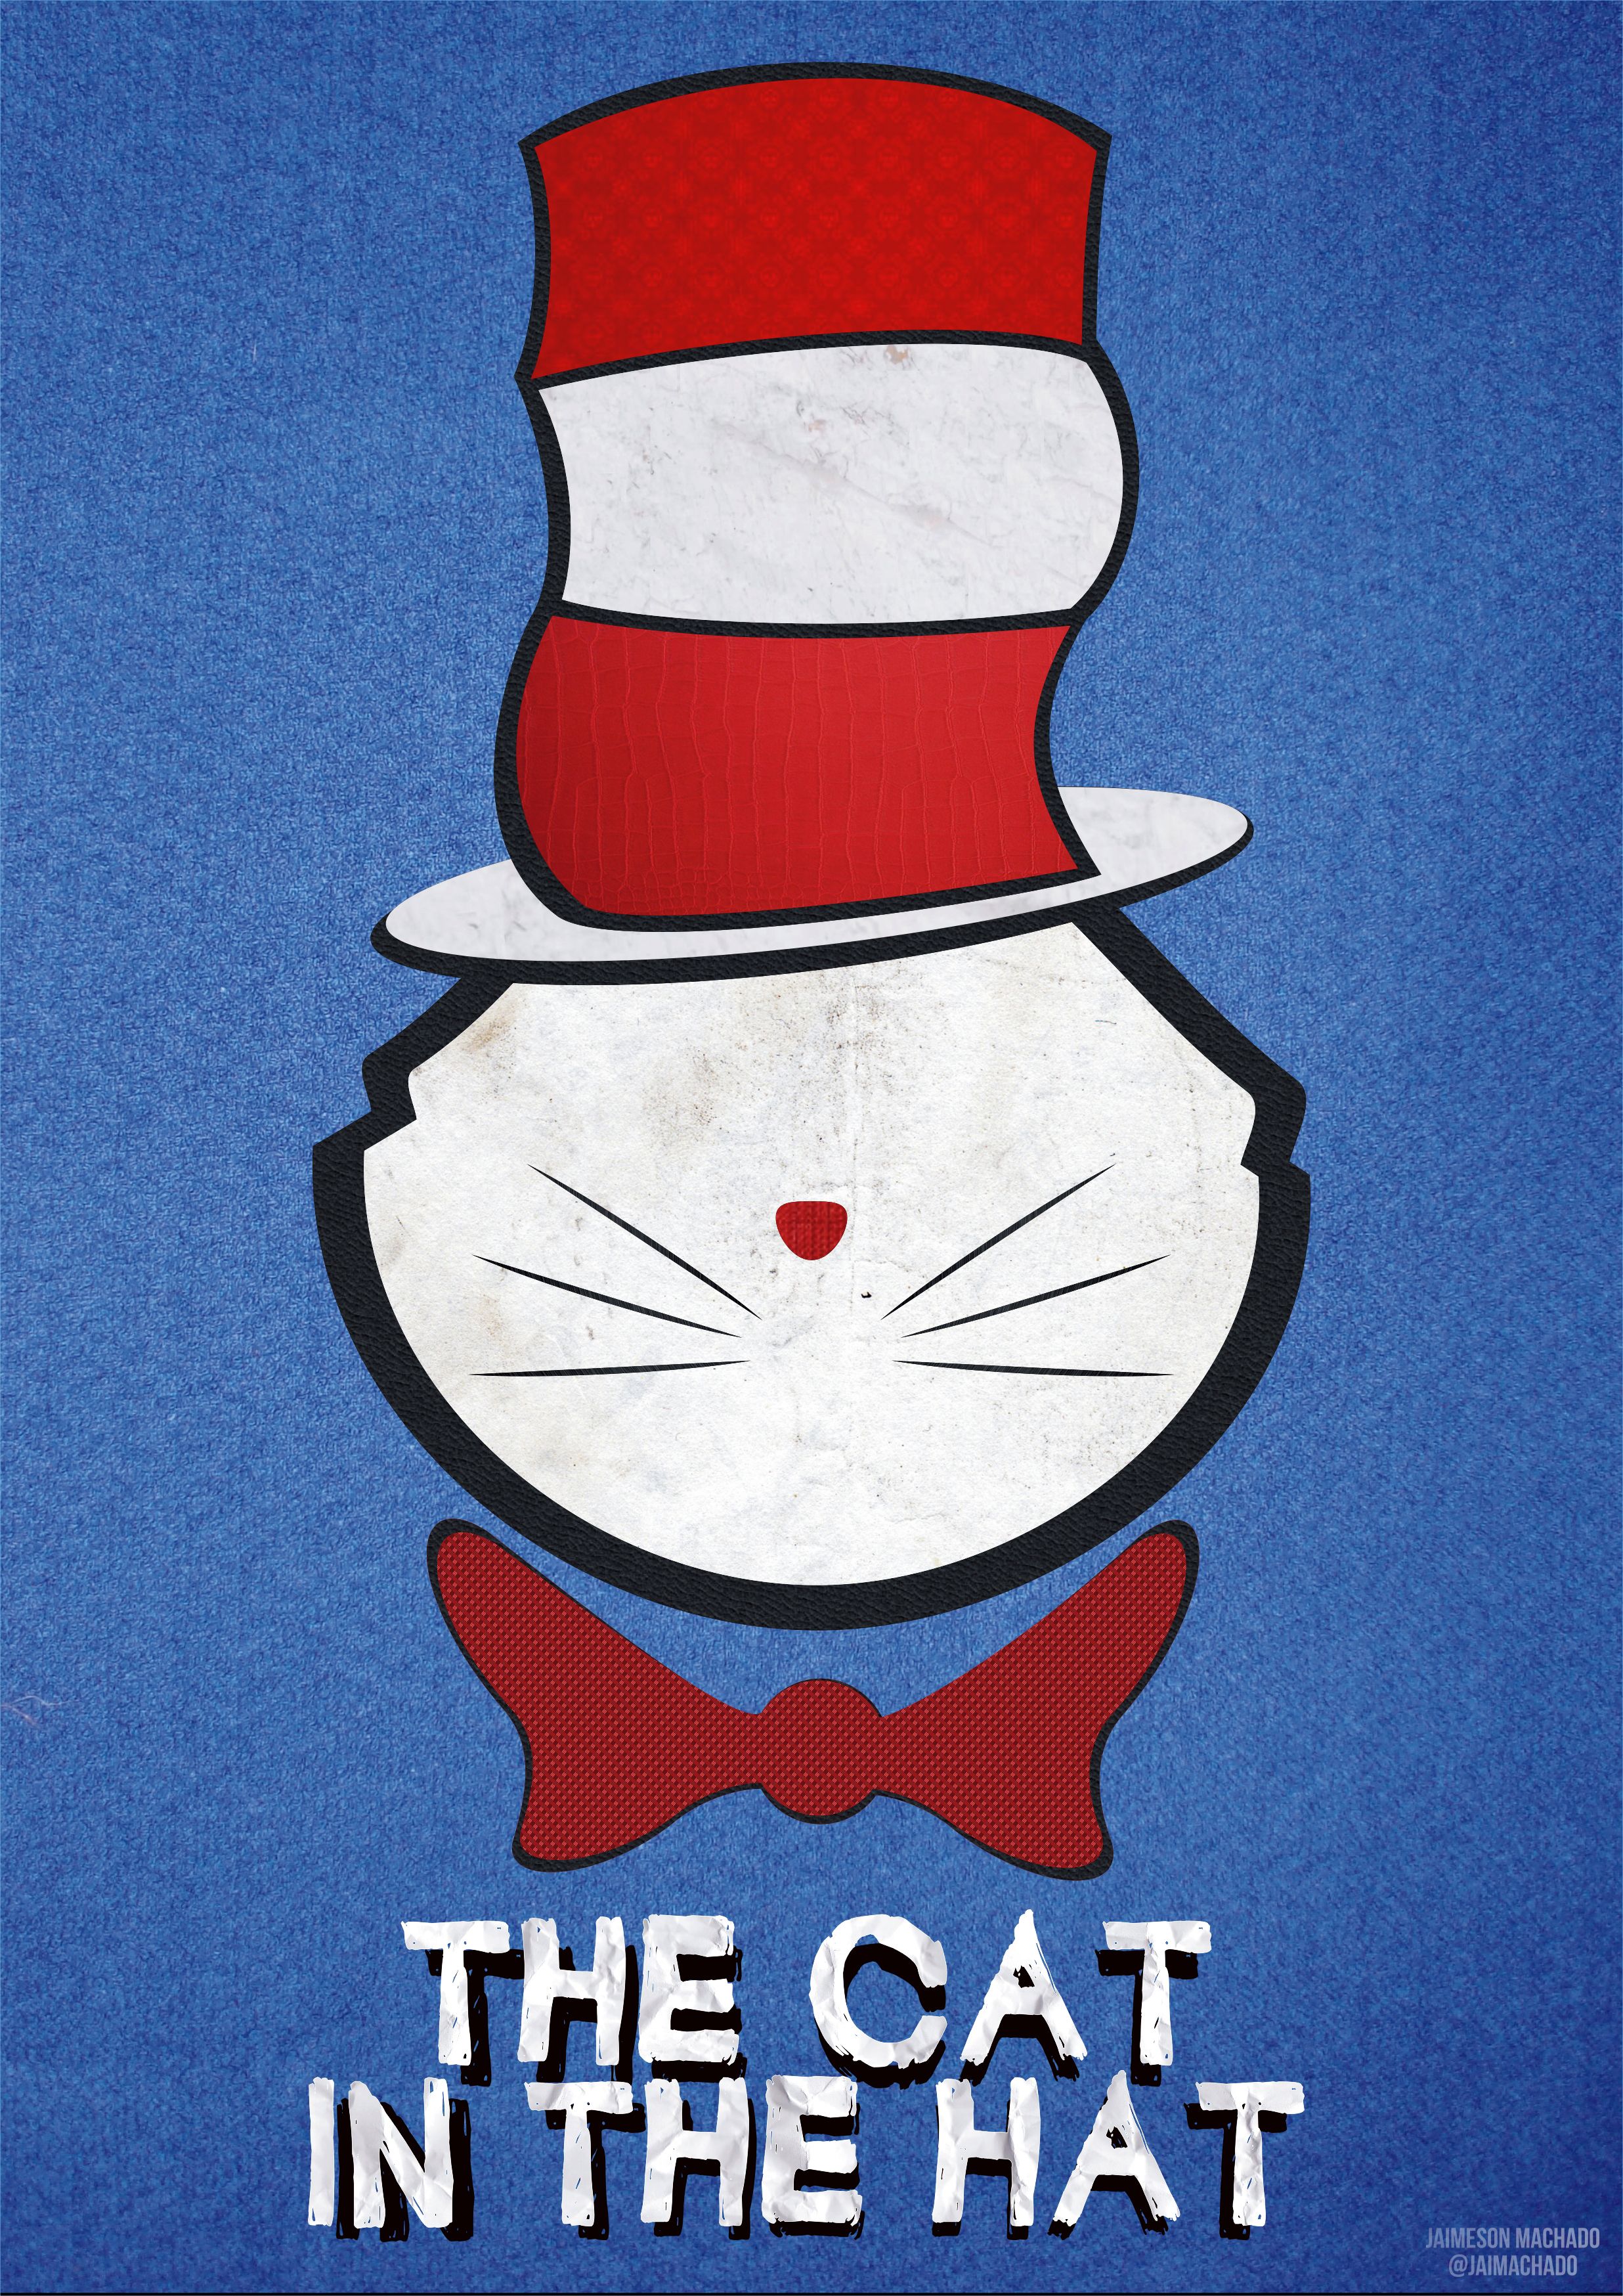 THE CAT IN THE HAT by JaiMachado.